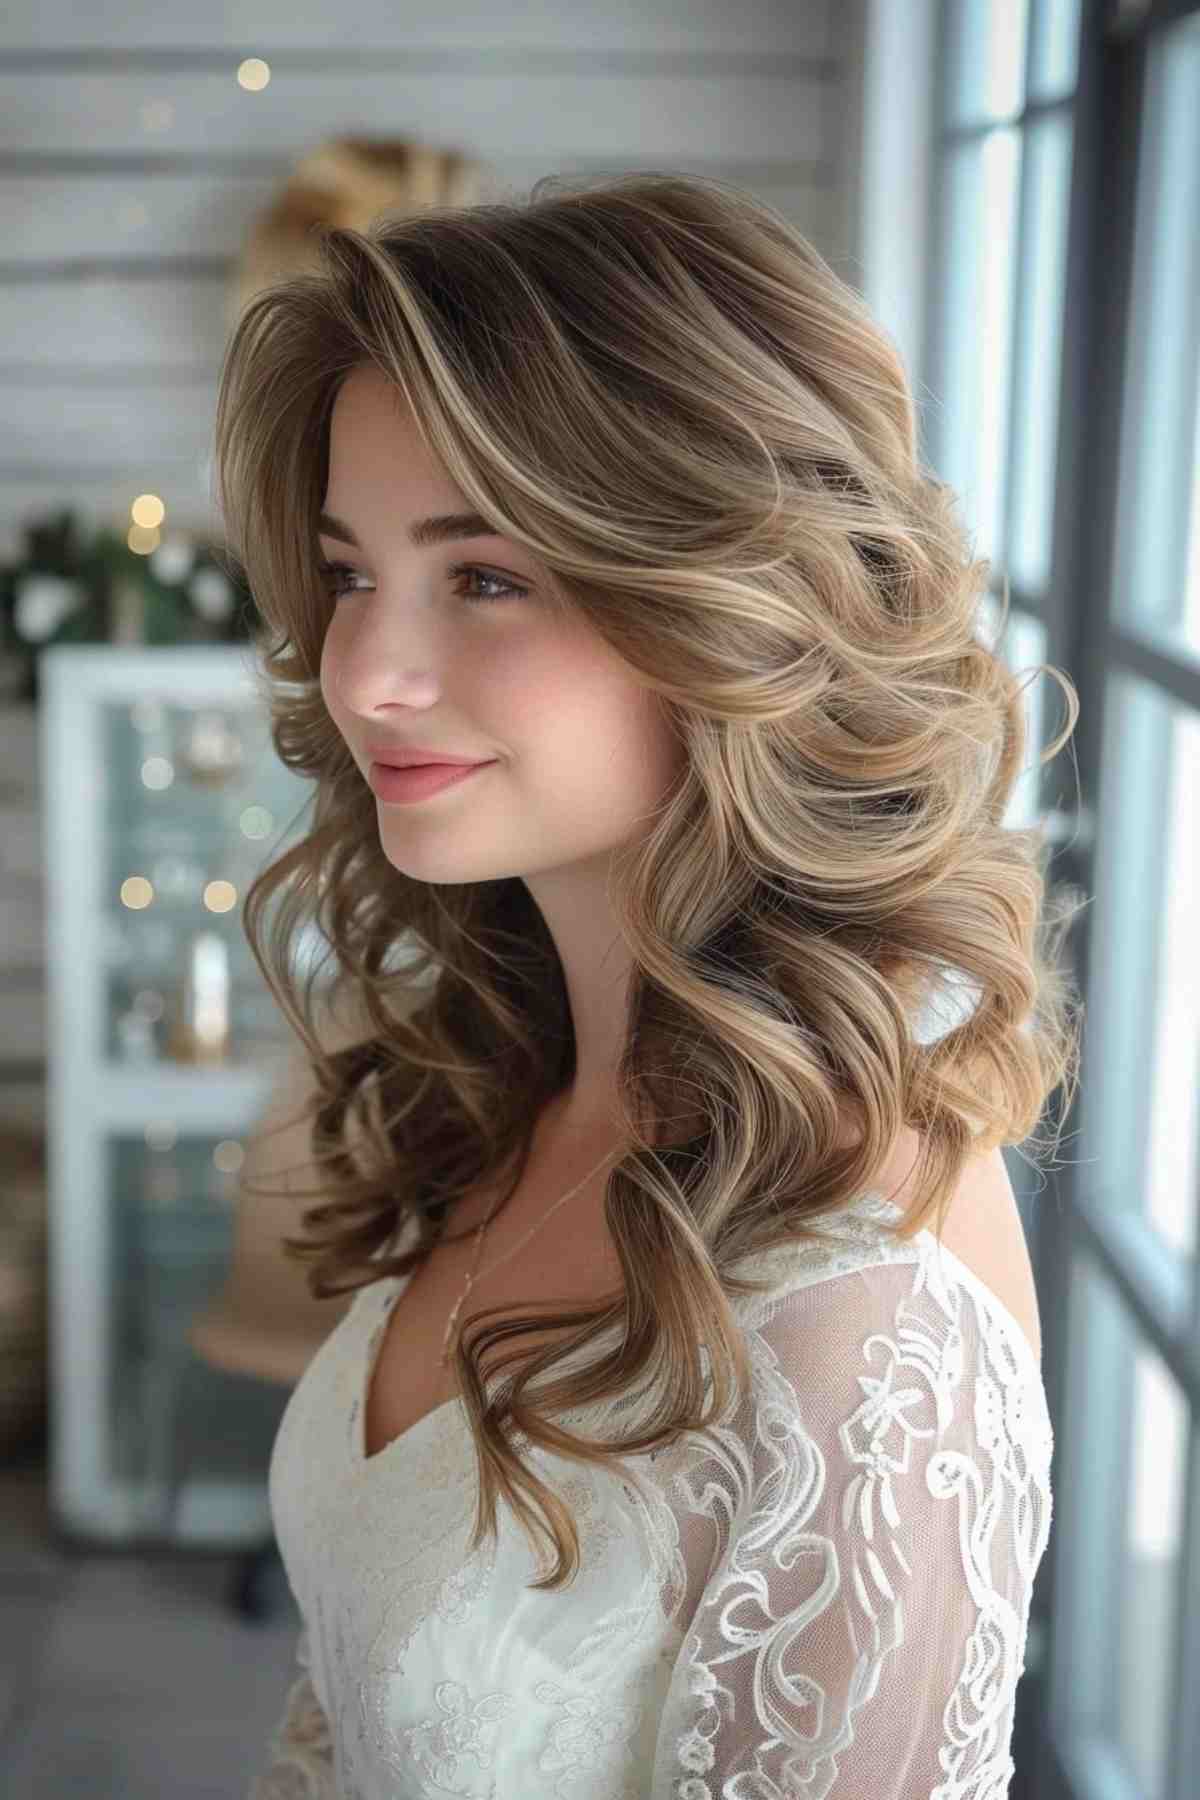 Soft Romantic Waves Date Night Hairstyle